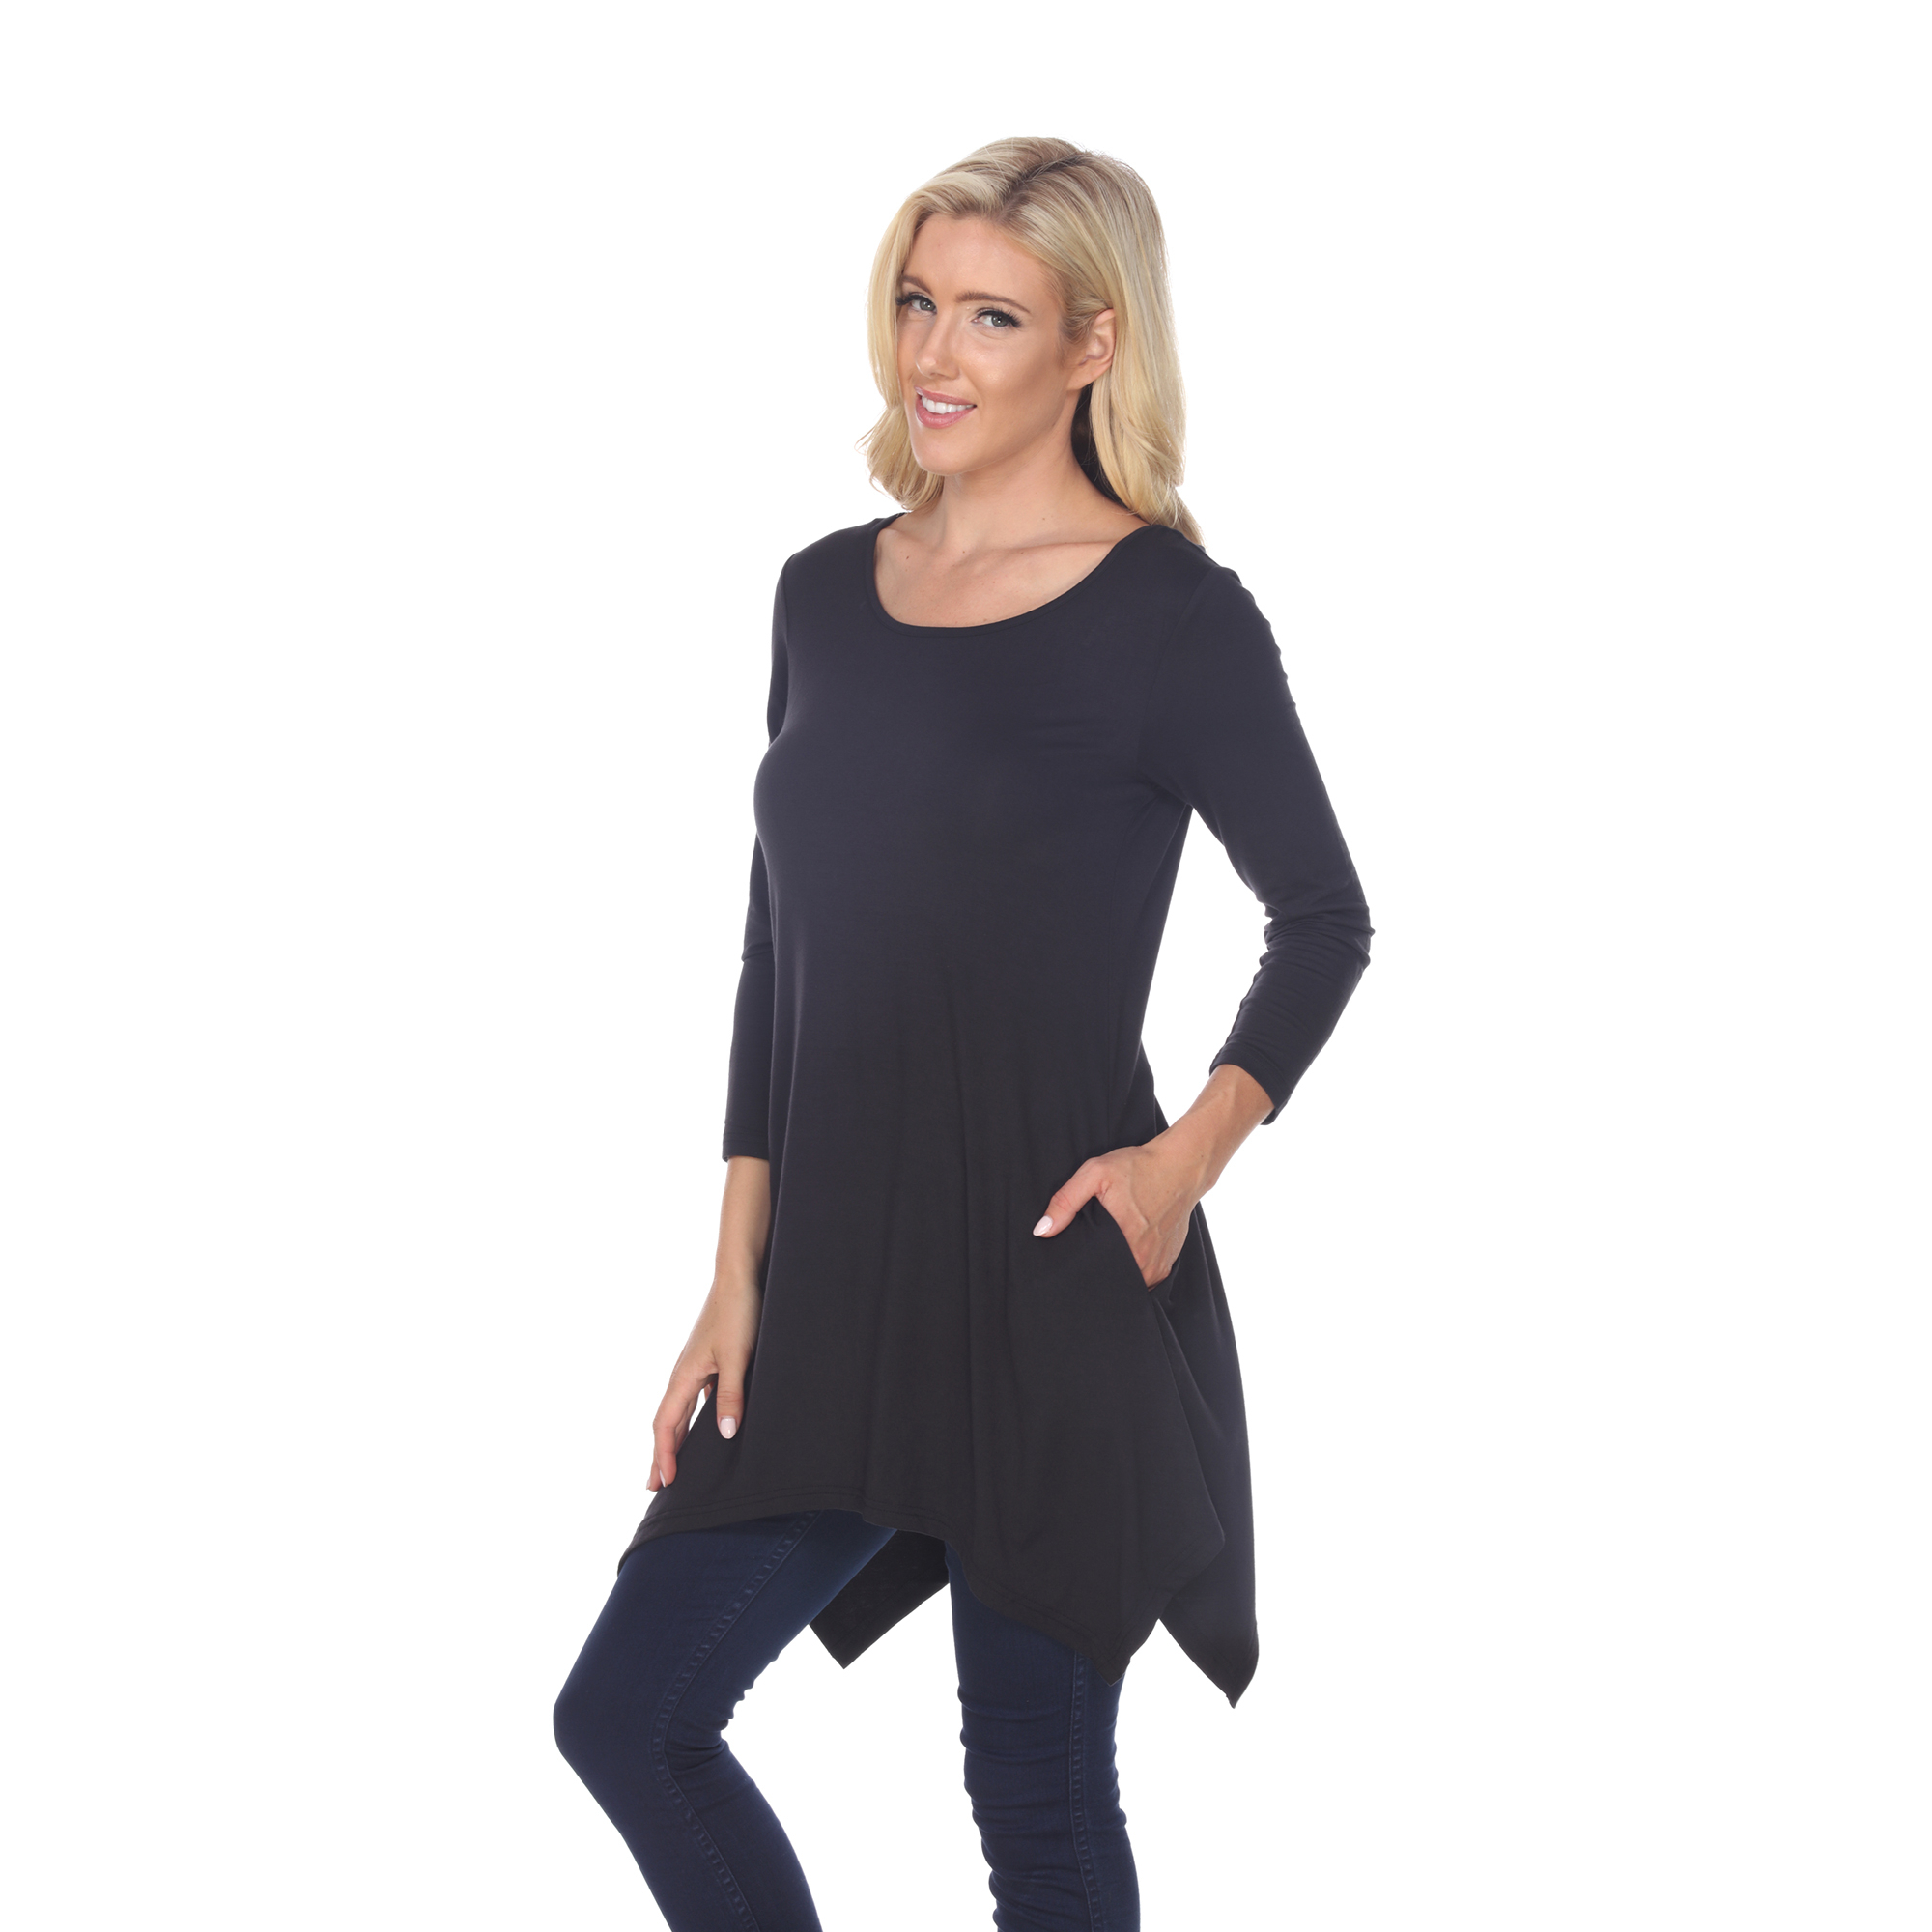 White Mark Women's Quarter Sleeve Tunic Top With Pockets - Black, X-Large